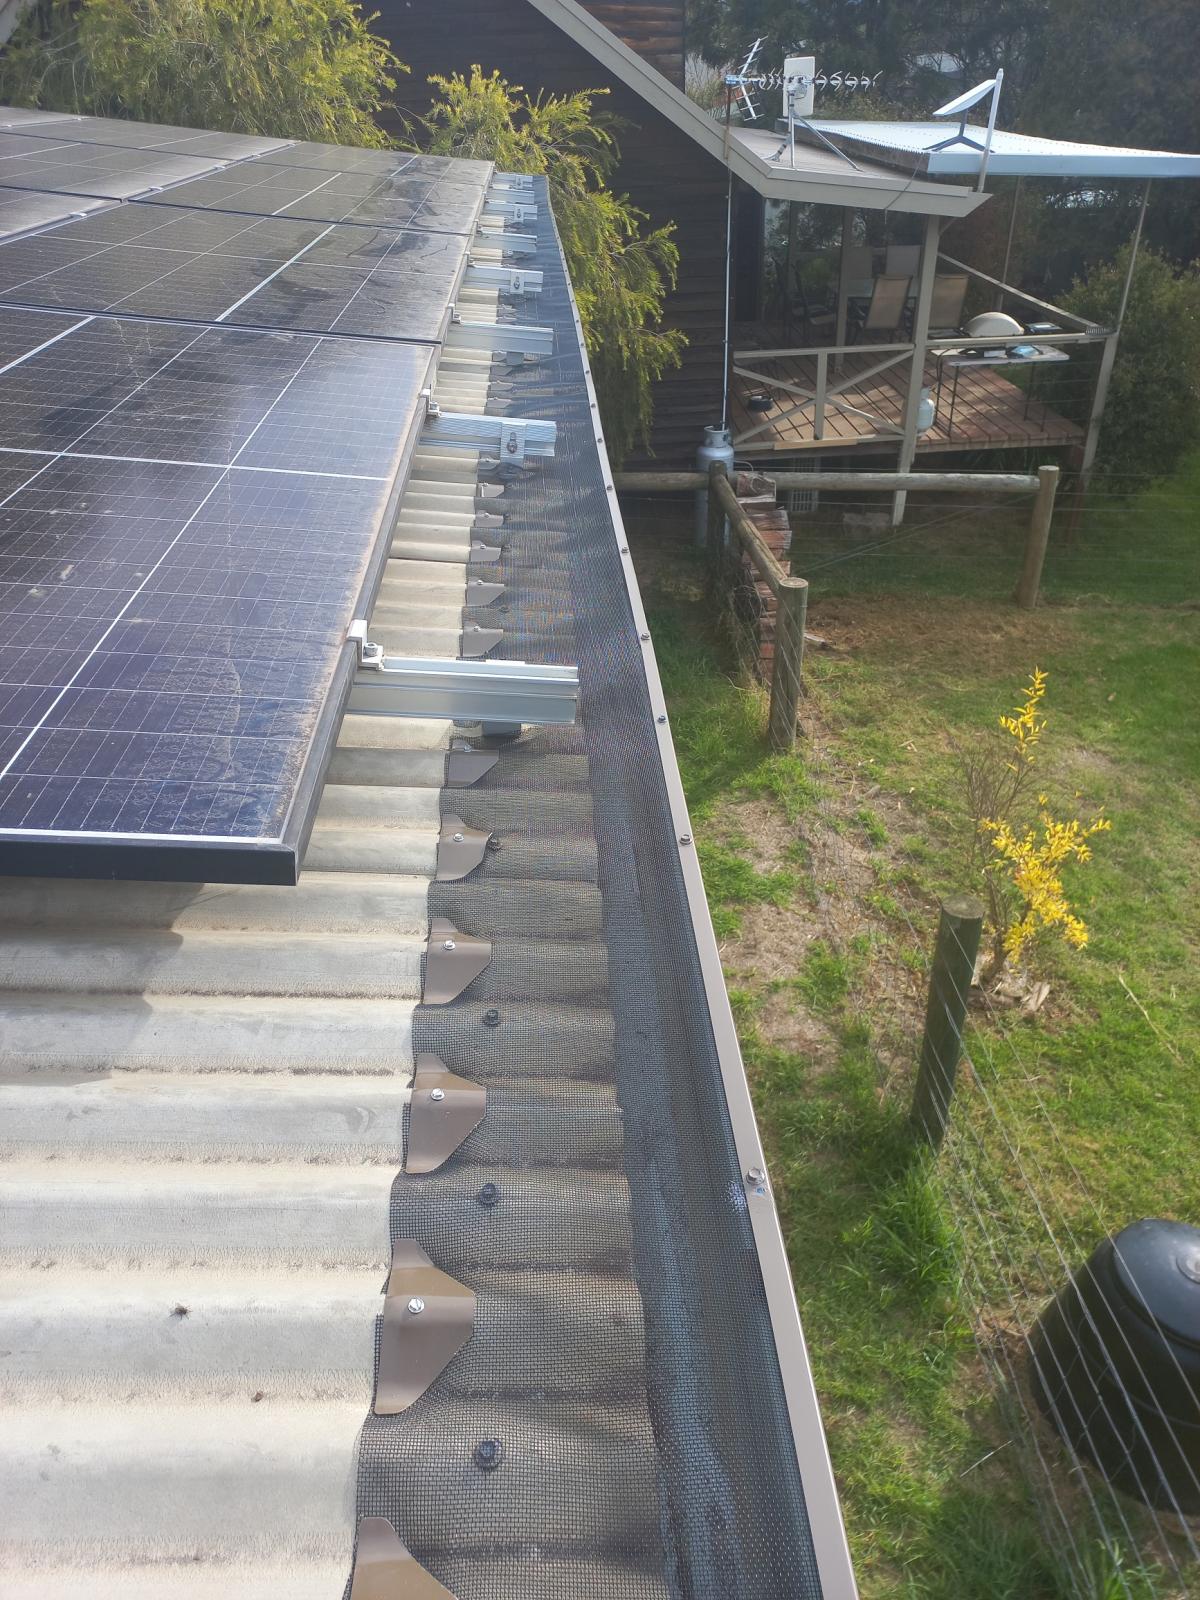 View Photo: Gutter Guards around solar panels